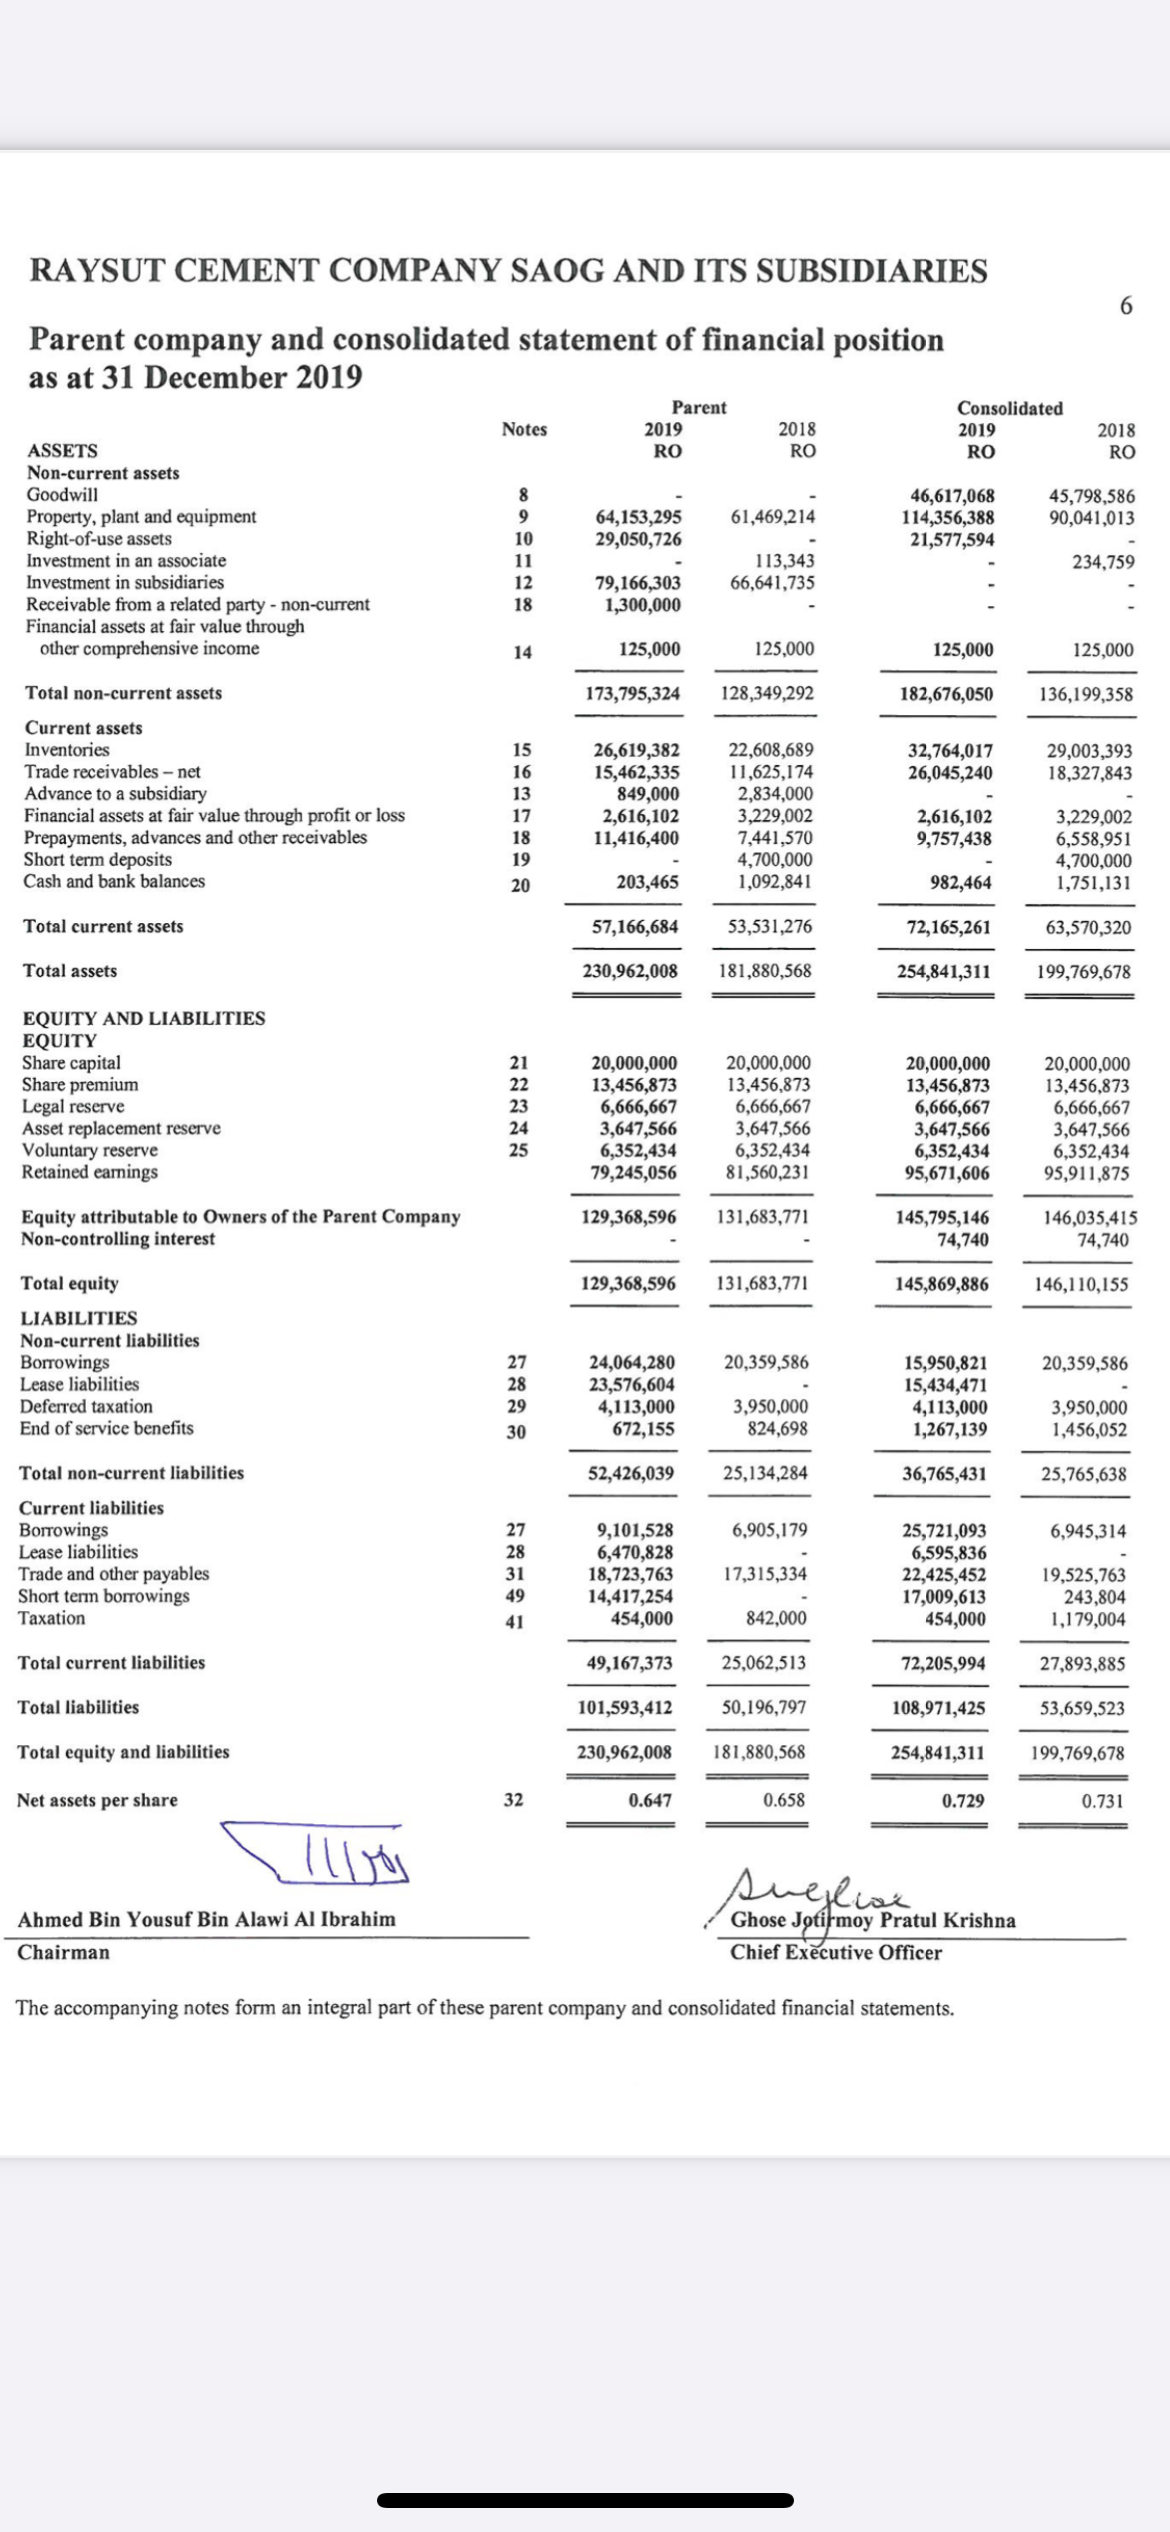 RAYSUT CEMENT COMPANY SAOG AND ITS SUBSIDIARIES
Parent company and consolidated statement of financial position
as at 31 December 2019
Parent
Consolidated
Notes
2019
2018
2019
2018
ASSETS
Non-current assets
RO
RO
RO
RO
Goodwill
64,153,295
29,050,726
46,617,068
114,356,388
21,577,594
45,798,586
90,041,013
Property, plant and equipment
Right-of-use assets
Investment in an associate
Investment in subsidiaries
Receivable from a related party - non-current
Financial assets at fair value through
other comprehensive income
61,469,214
10
113,343
66,641,735
11
234,759
79,166,303
1,300,000
12
18
14
125,000
125,000
125,000
125,000
Total non-current assets
173,795,324
128,349,292
182,676,050
136,199,358
Current assets
Inventories
Trade receivables – net
15
26,619,382
15,462,335
849,000
2,616,102
11,416,400
22,608,689
11,625,174
2,834,000
3,229,002
7,441,570
4,700,000
1,092,841
32,764,017
26,045,240
29,003,393
18,327,843
16
Advance to a subsidiary
Financial assets at fair value through profit or loss
Prepayments, advances and other receivables
Short term deposits
Cash and bank balances
13
17
2,616,102
9,757,438
3,229,002
6,558,951
4,700,000
1,751,131
18
19
20
203,465
982,464
Total current assets
57,166,684
53,531,276
72,165,261
63,570,320
Total assets
230,962,008
181,880,568
254,841,311
199,769,678
EQUITY AND LIABILITIES
EQUITY
Share capital
Share premium
Legal reserve
Asset replacement reserve
Voluntary reserve
Retained earnings
20,000,000
13,456,873
6,666,667
3,647,566
6,352,434
79,245,056
20,000,000
13,456,873
6,666,667
3,647,566
6,352,434
81,560,231
21
20,000,000
13,456,873
6,666,667
3,647,566
6,352,434
95,671,606
20,000,000
13,456,873
6,666,667
3,647,566
6,352,434
95,911,875
22
23
24
25
Equity attributable to Owners of the Parent Company
Non-controlling interest
129,368,596
131,683,771
145,795,146
74,740
146,035,415
74,740
Total equity
129,368,596
131,683,771
145,869,886
146,110,155
LIABILITIES
Non-current liabilities
Borrowings
Lease liabilities
27
20,359,586
24,064,280
23,576,604
4,113,000
672,155
15,950,821
15,434,471
4,113,000
1,267,139
20,359,586
28
Deferred taxation
29
3,950,000
824,698
3,950,000
1,456,052
End of service benefits
30
Total non-current liabilities
52,426,039
25,134,284
36,765,431
25,765,638
Current liabilities
Borrowings
Lease liabilities
Trade and other payables
Short term borrowings
Taxation
9,101,528
6,470,828
18,723,763
14,417,254
454,000
27
6,905,179
25,721,093
6,595,836
22,425,452
17,009,613
454,000
6,945,314
28
31
17,315,334
19,525,763
243,804
1,179,004
49
41
842,000
Total current liabilities
49,167,373
25,062,513
72,205,994
27,893,885
Total liabilities
101,593,412
50,196,797
108,971,425
53,659,523
Total equity and liabilities
230,962,008
181,880,568
254,841,311
199,769,678
Net assets per share
32
0.647
0.658
0.729
0.731
suegliae
Ghose Jøtirmoy Pratul Krishna
Chief Executive Officer
Ahmed Bin Yousuf Bin Alawi Al Ibrahim
Chairman
The accompanying notes form an integral part of these parent company and consolidated financial statements.
